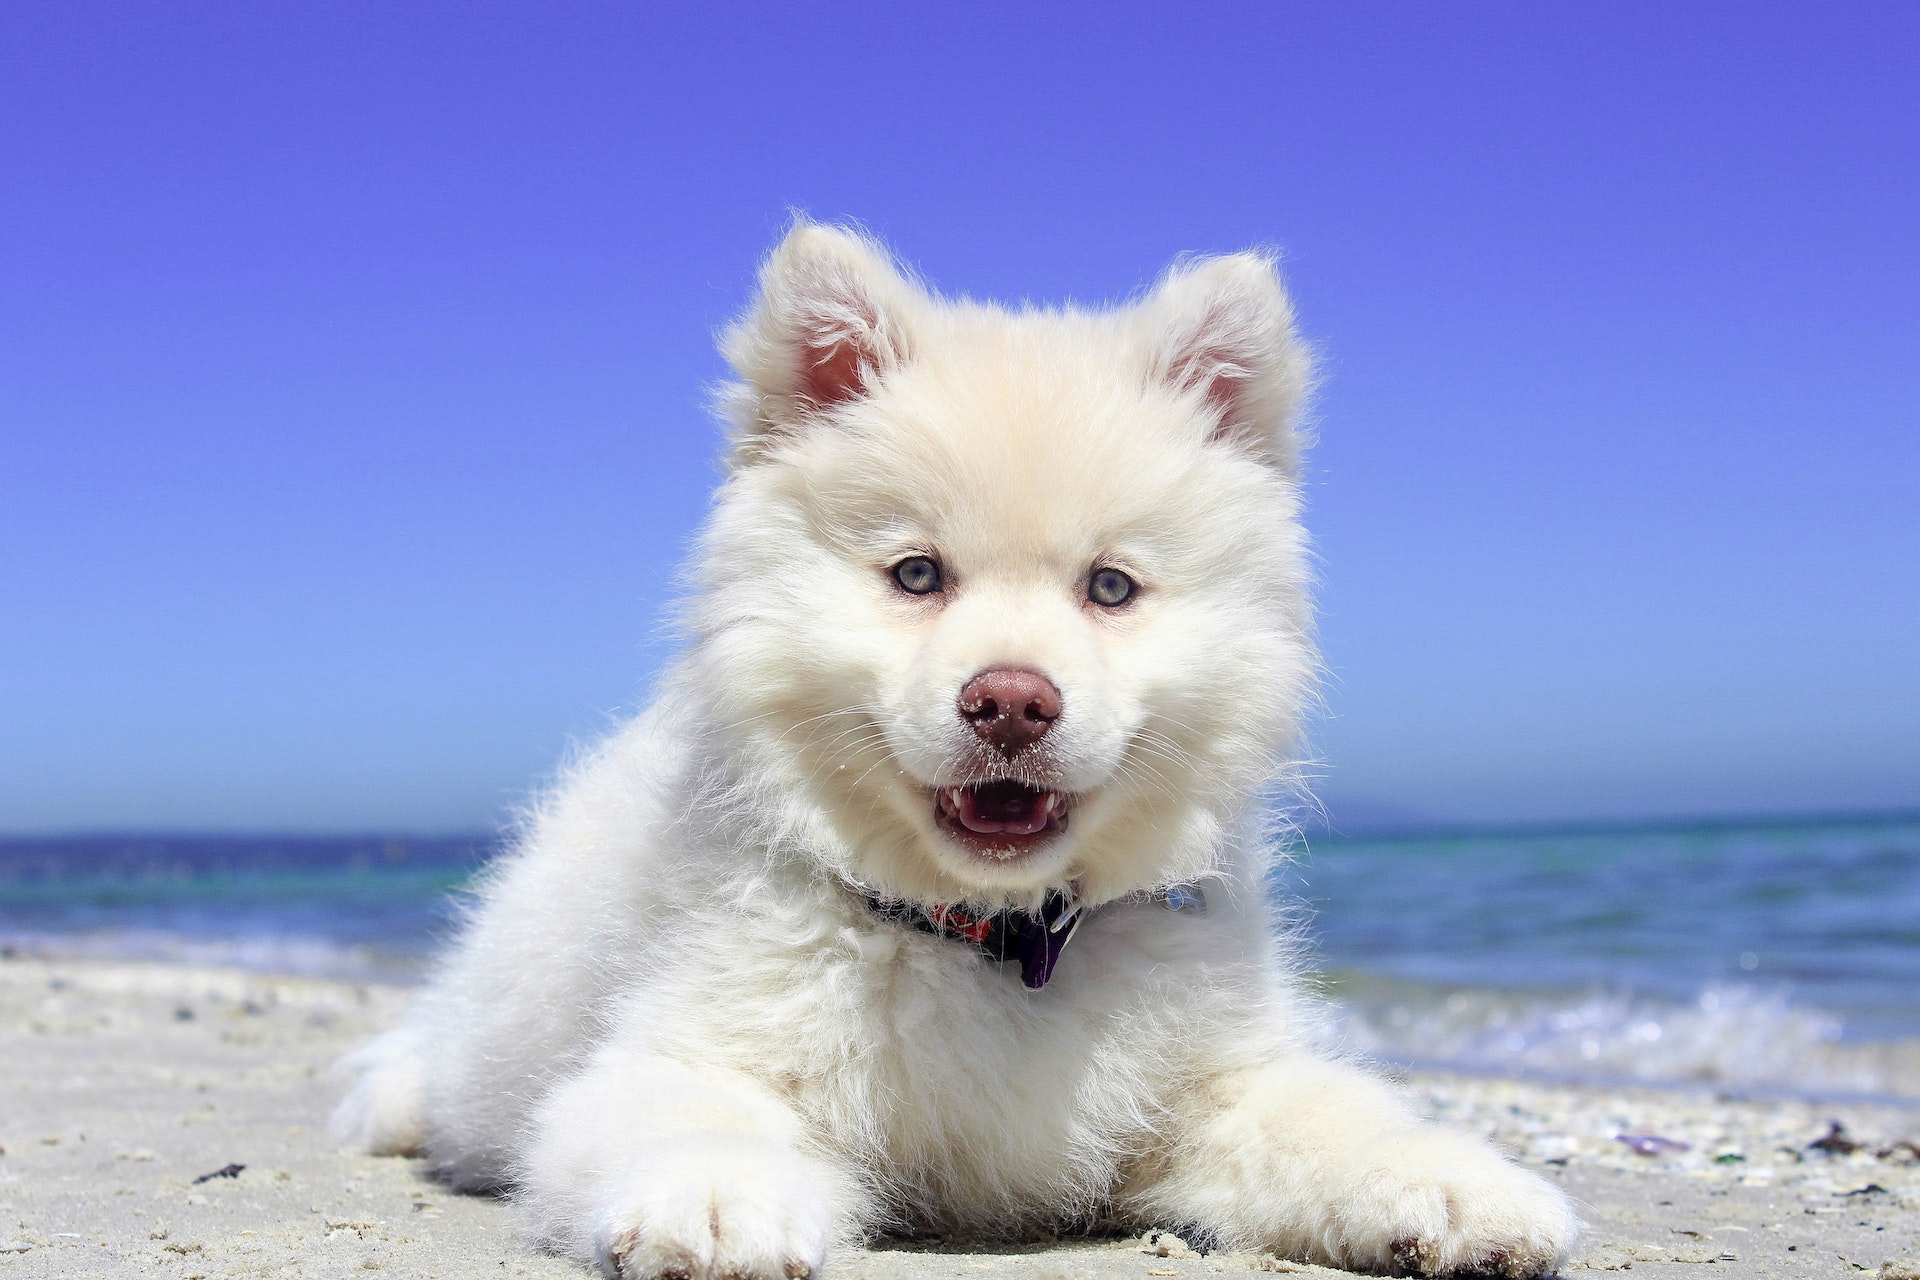 5 Fascinating Facts About Dogs You Probably Didn’t Know